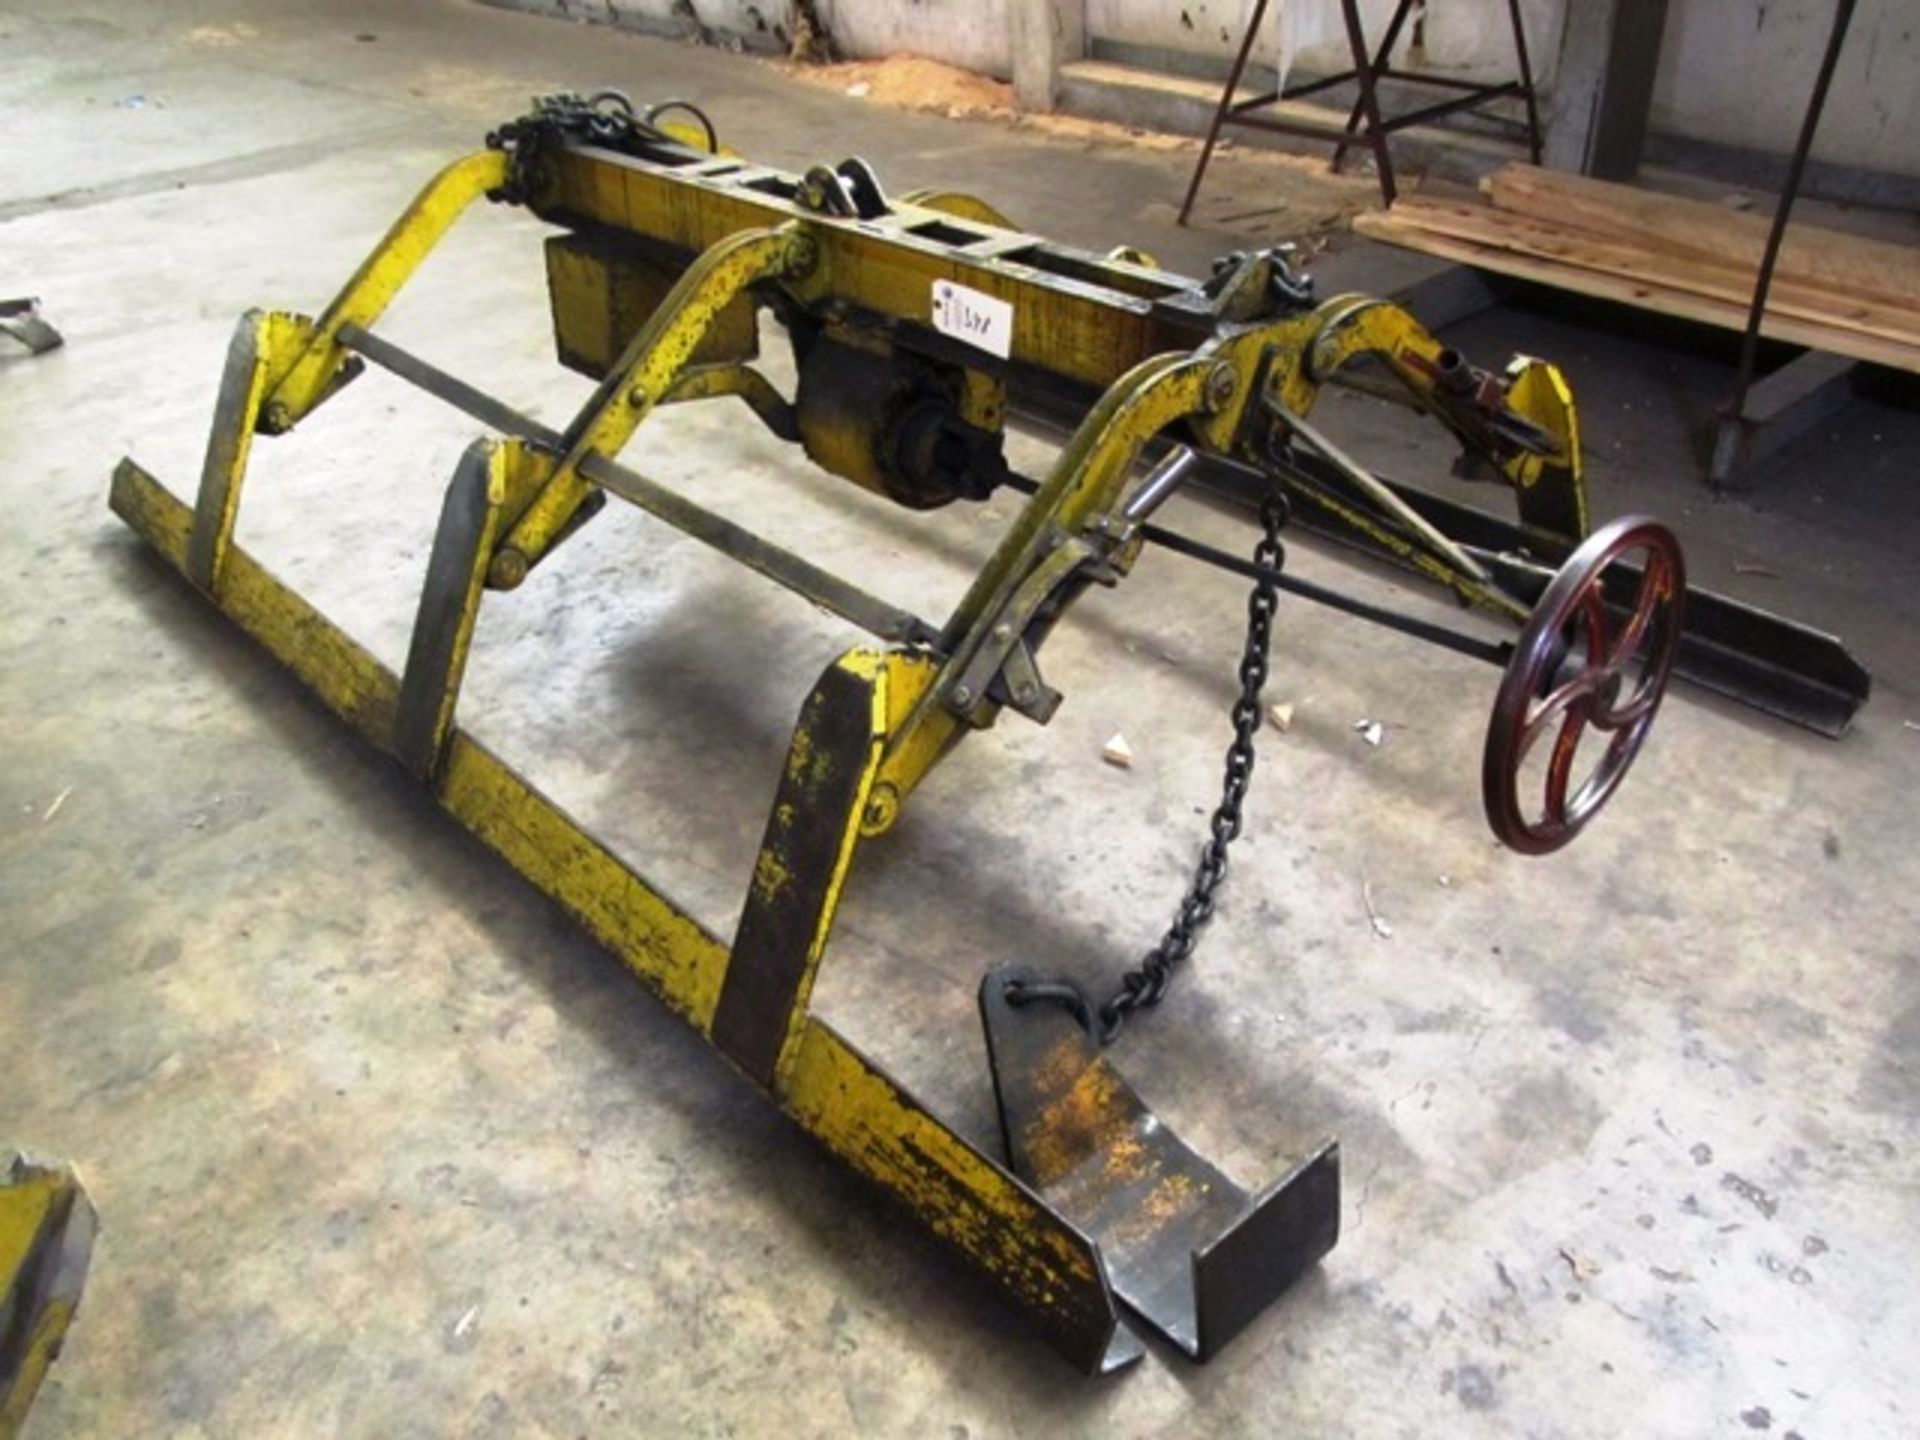 Approx 10,000 lb Capacity 9' Material Lifter